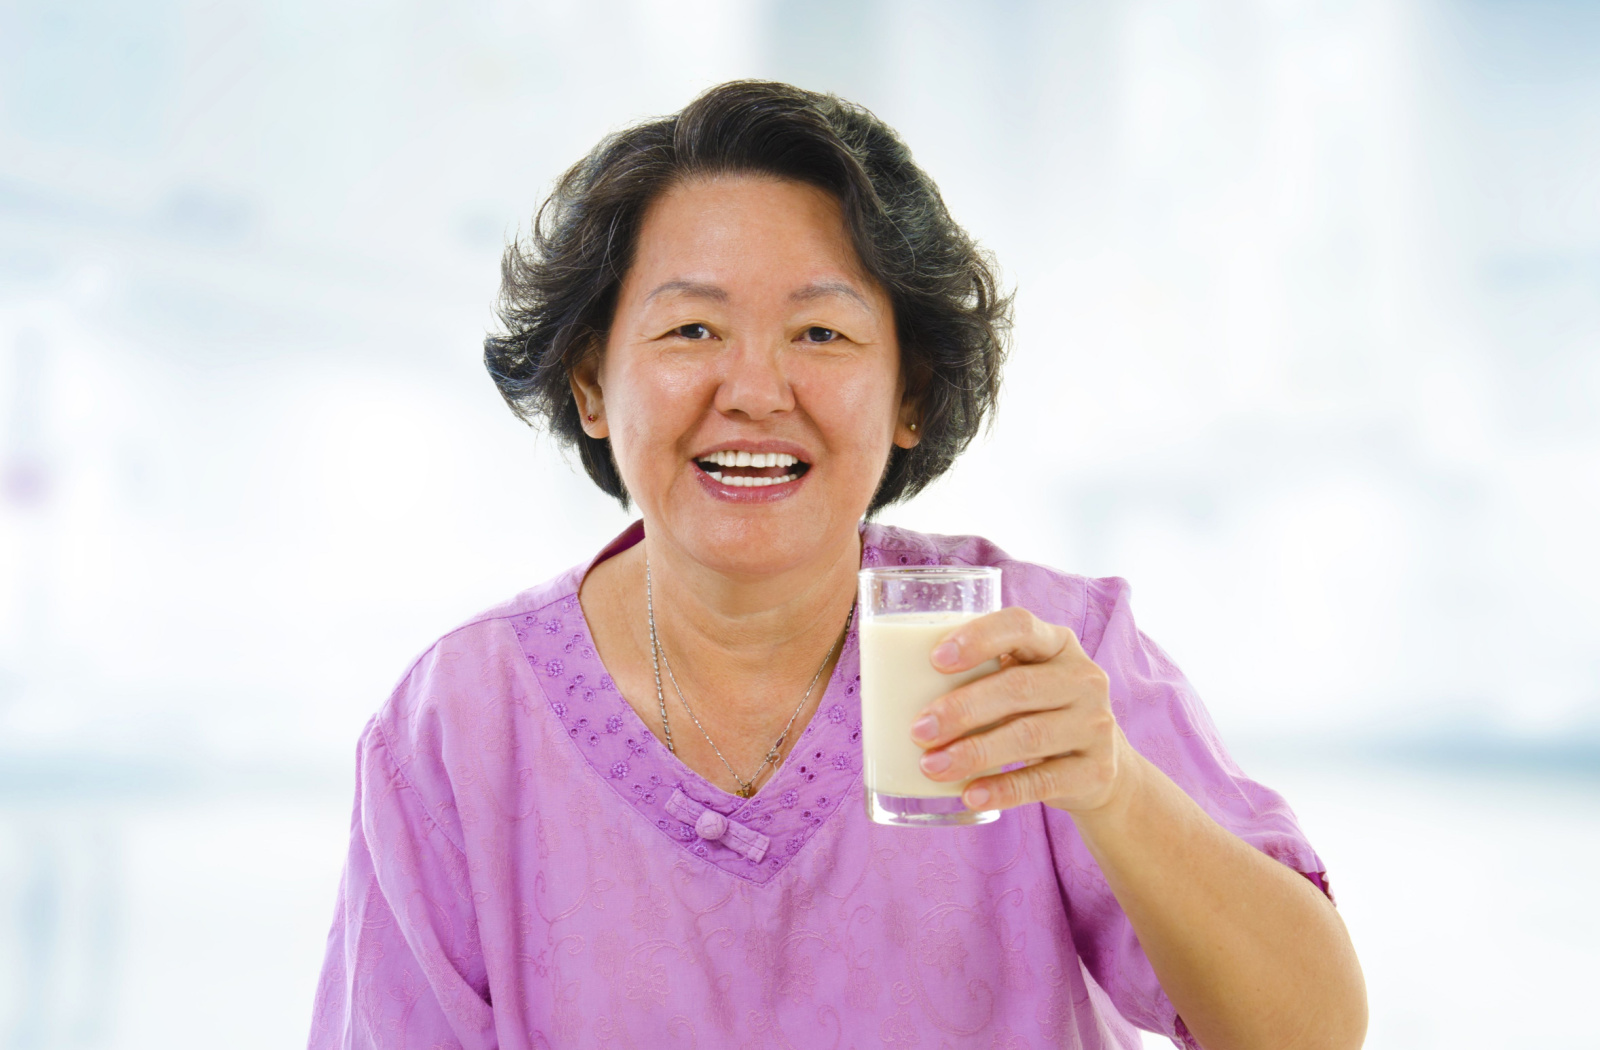 An older adult woman holding a glass of soy milk on her left hand, smiling and looking directly at the camera